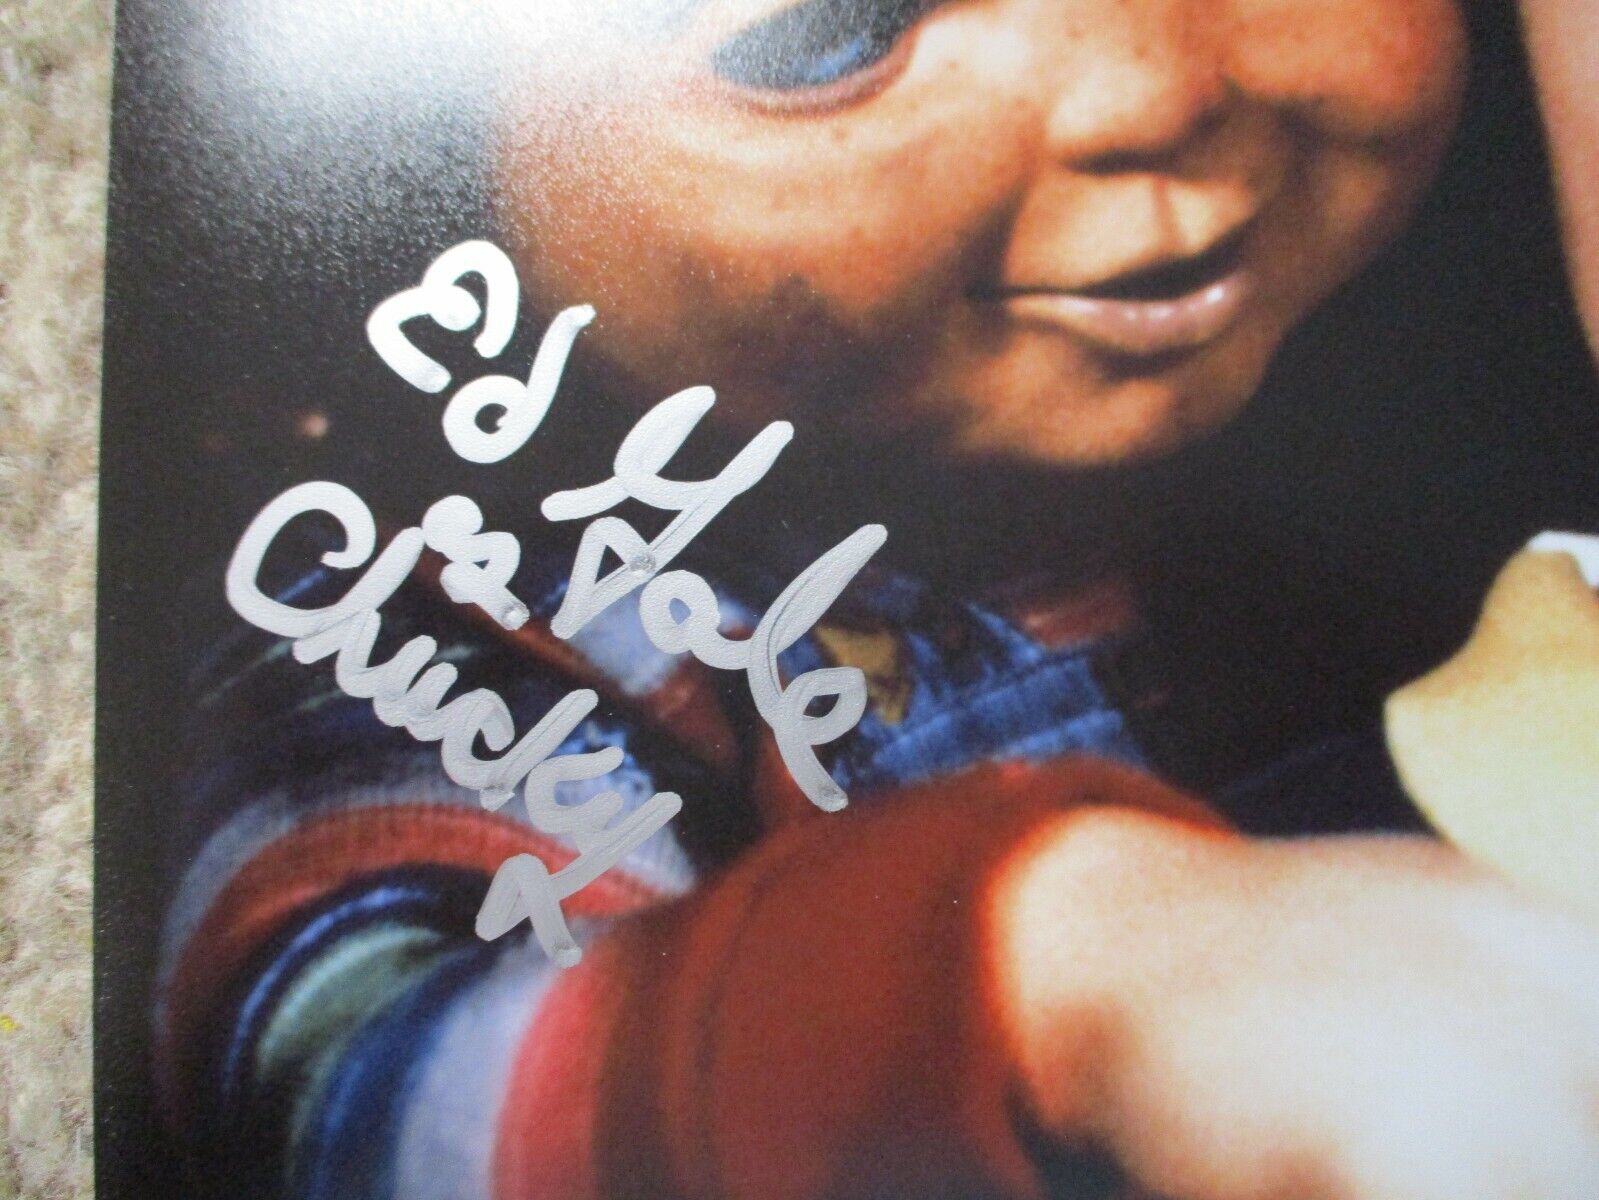 Ed Gale Alex Vincent signed Chucky Child's Play 8x10 photo JSA Full Signature C